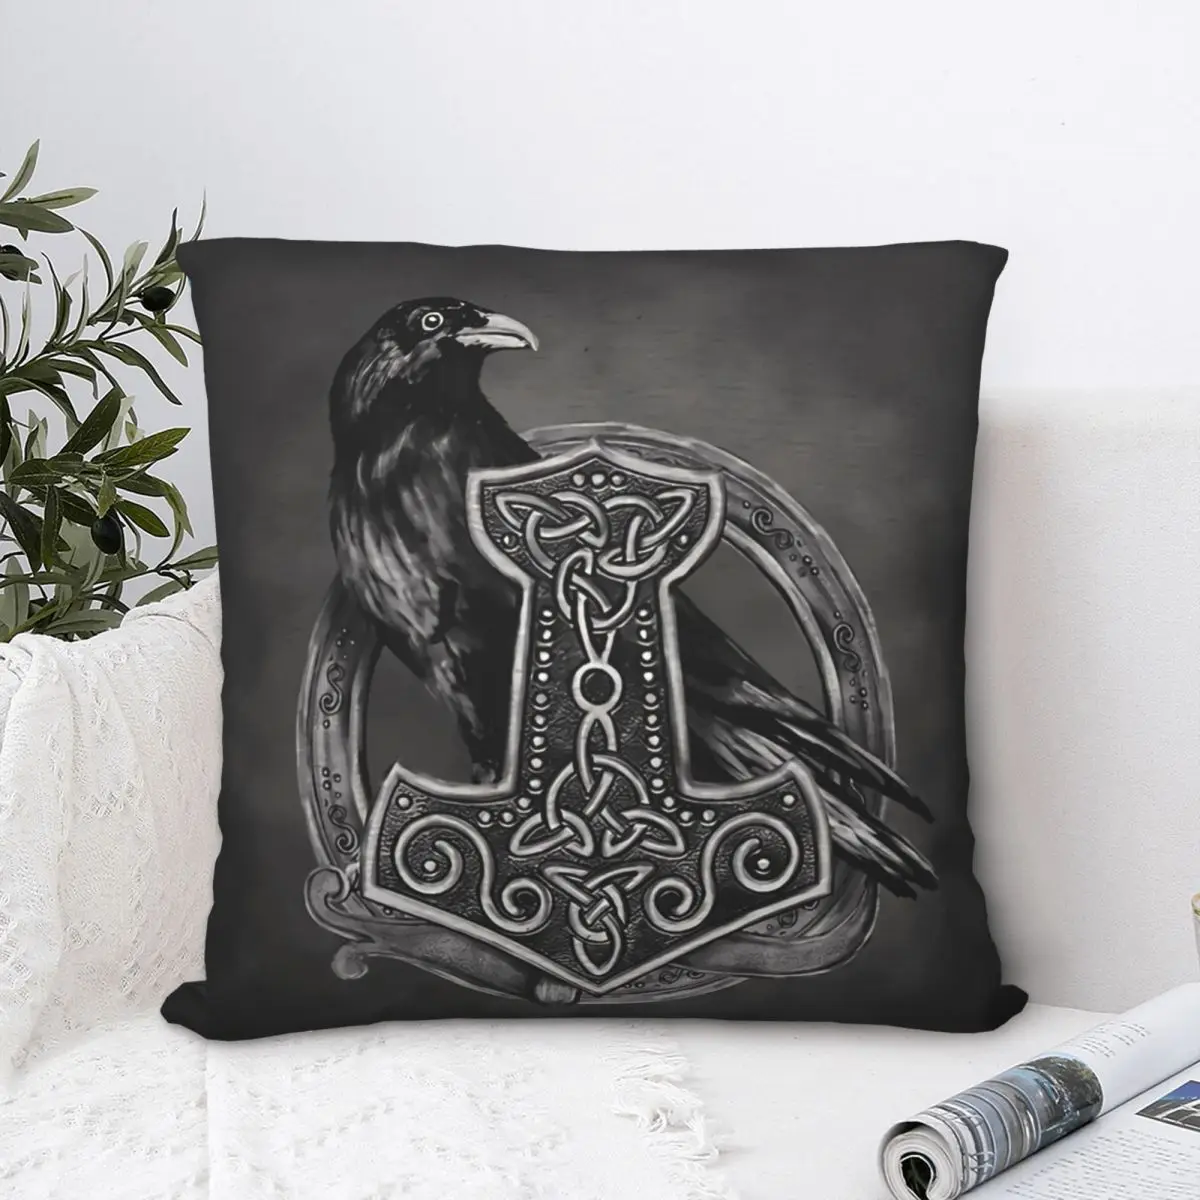 Mjolnir The Hammer Of Thor And Raven Pillowcase Viking Norse Mythology Backpack Cushion For Sofa Throw Pillow Case Decorative